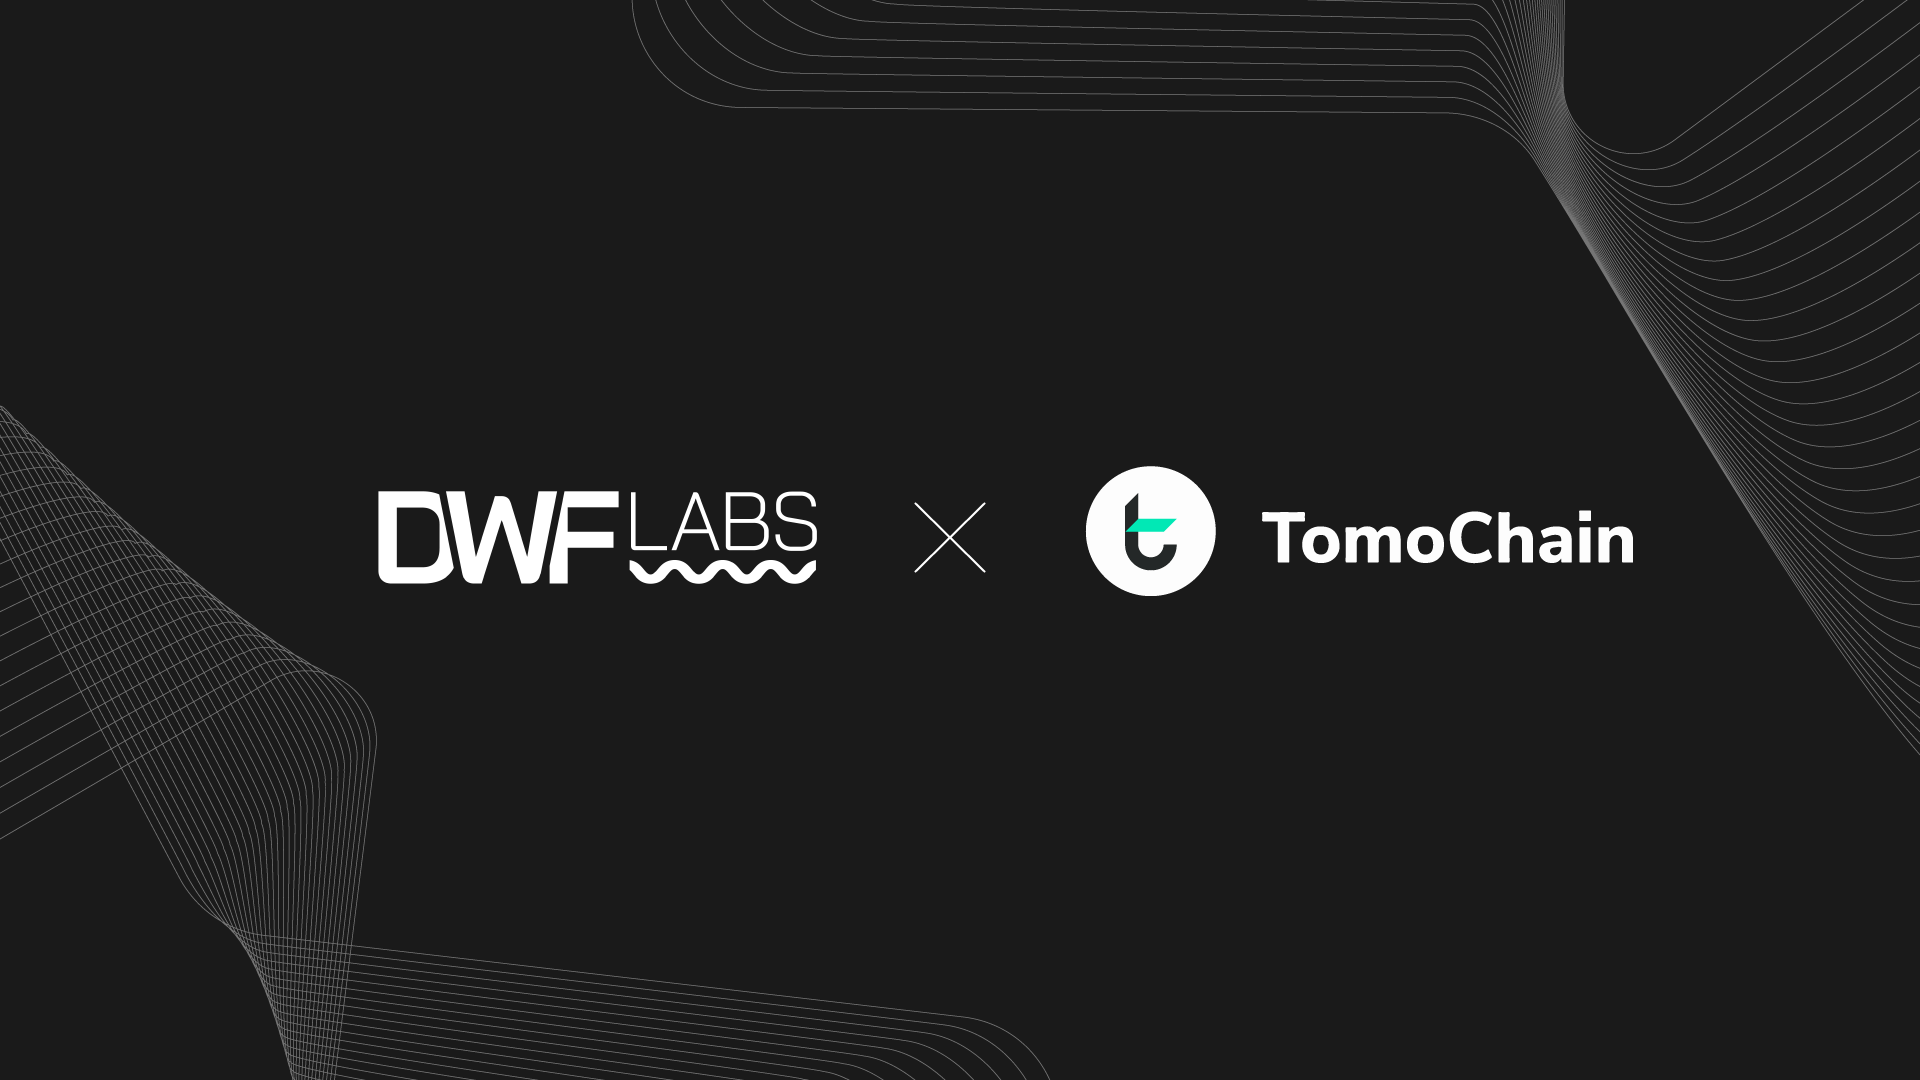 TomoChain Secures Token Investment Agreement with DWF Labs